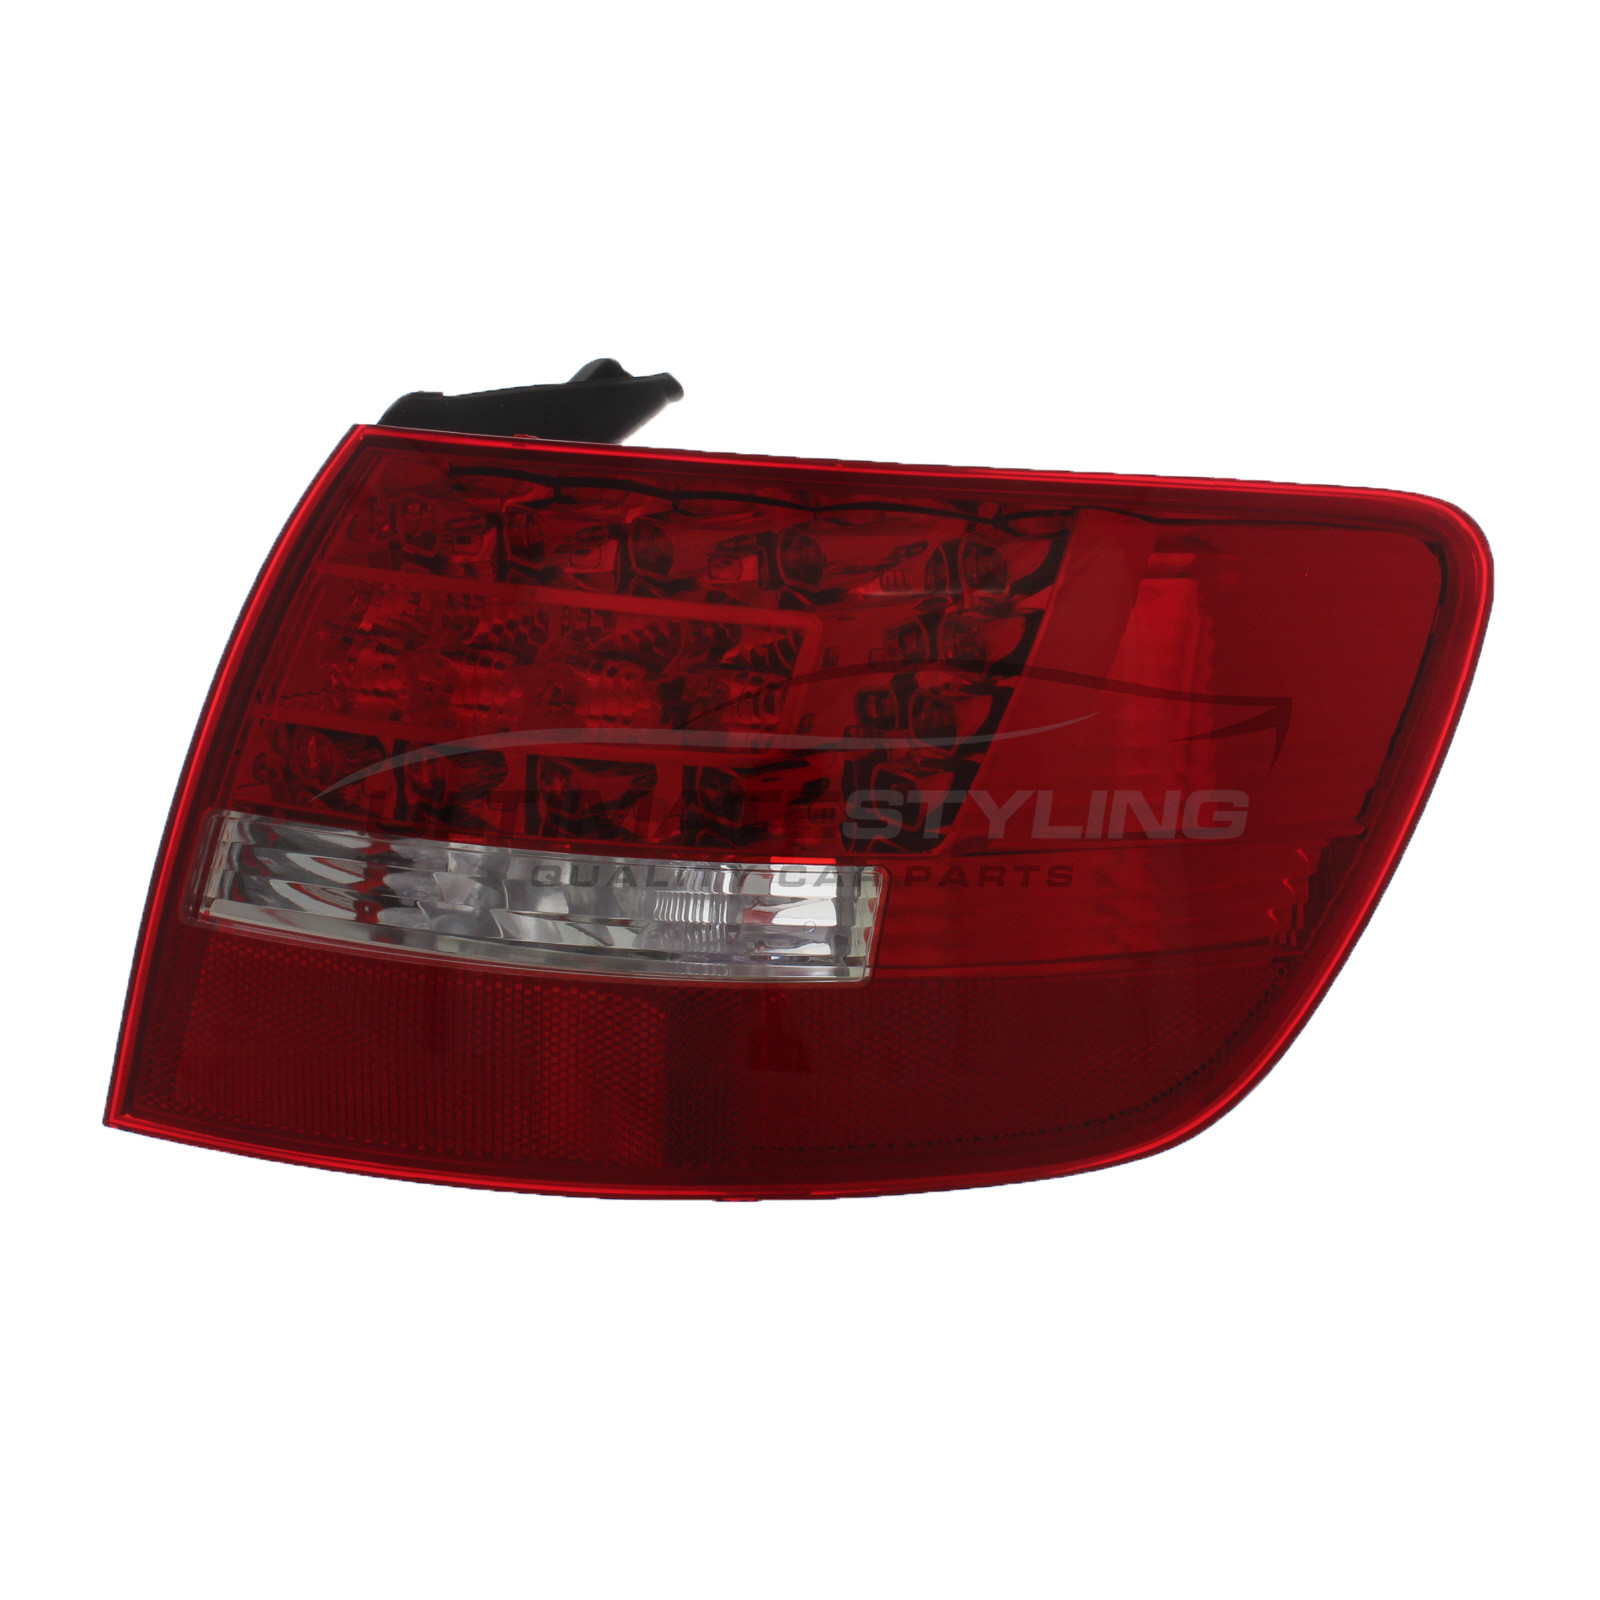 Audi A6 2008-2012 / Audi RS6 2008-2011 / Audi S6 2008-2012 LED with Clear Indicator Outer (Wing) Rear Light / Tail Light Excluding Bulb Holder Drivers Side (RH)